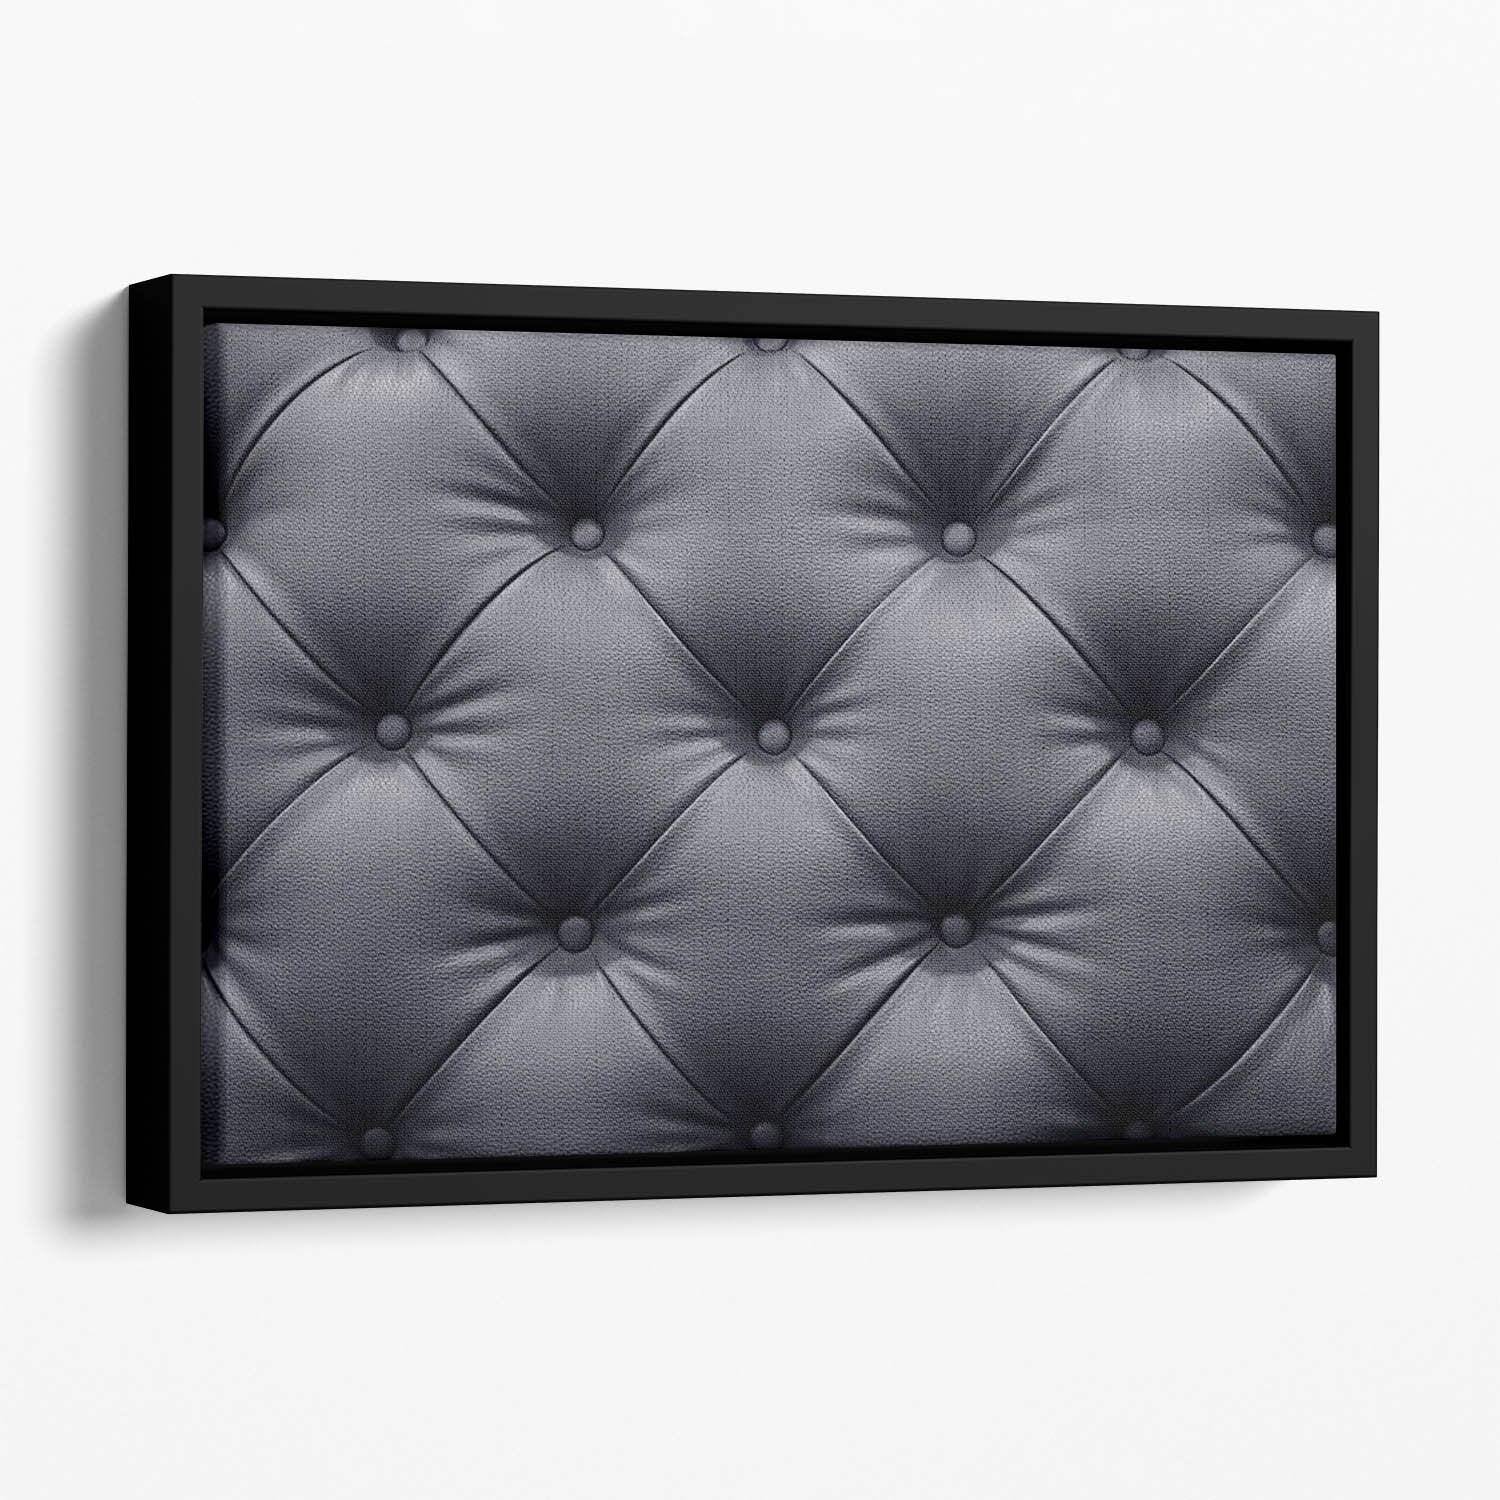 Black leather sofa texture Floating Framed Canvas